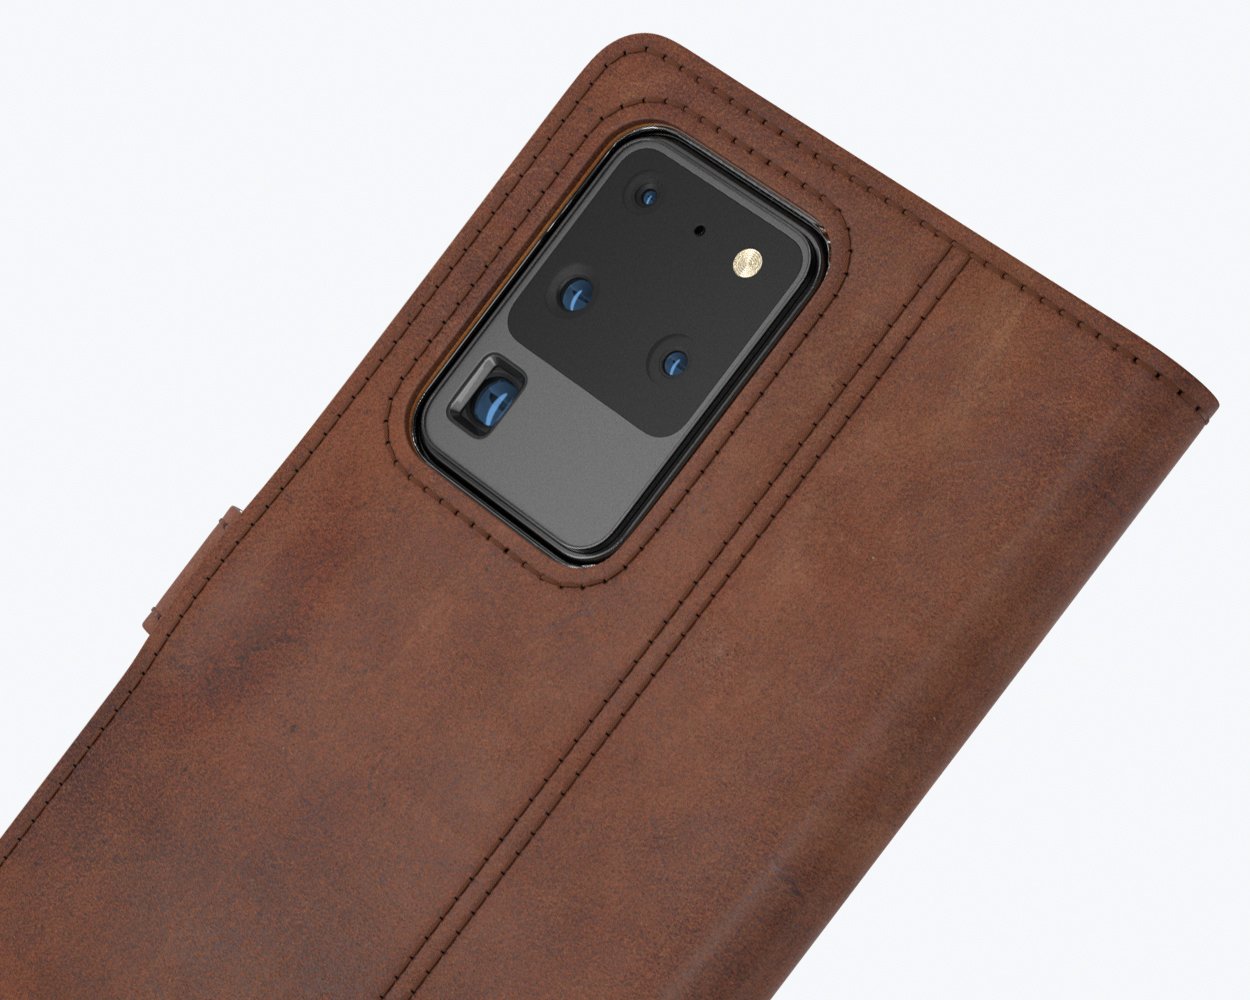 Vintage Leather Wallet - Samsung Galaxy S20 Ultra